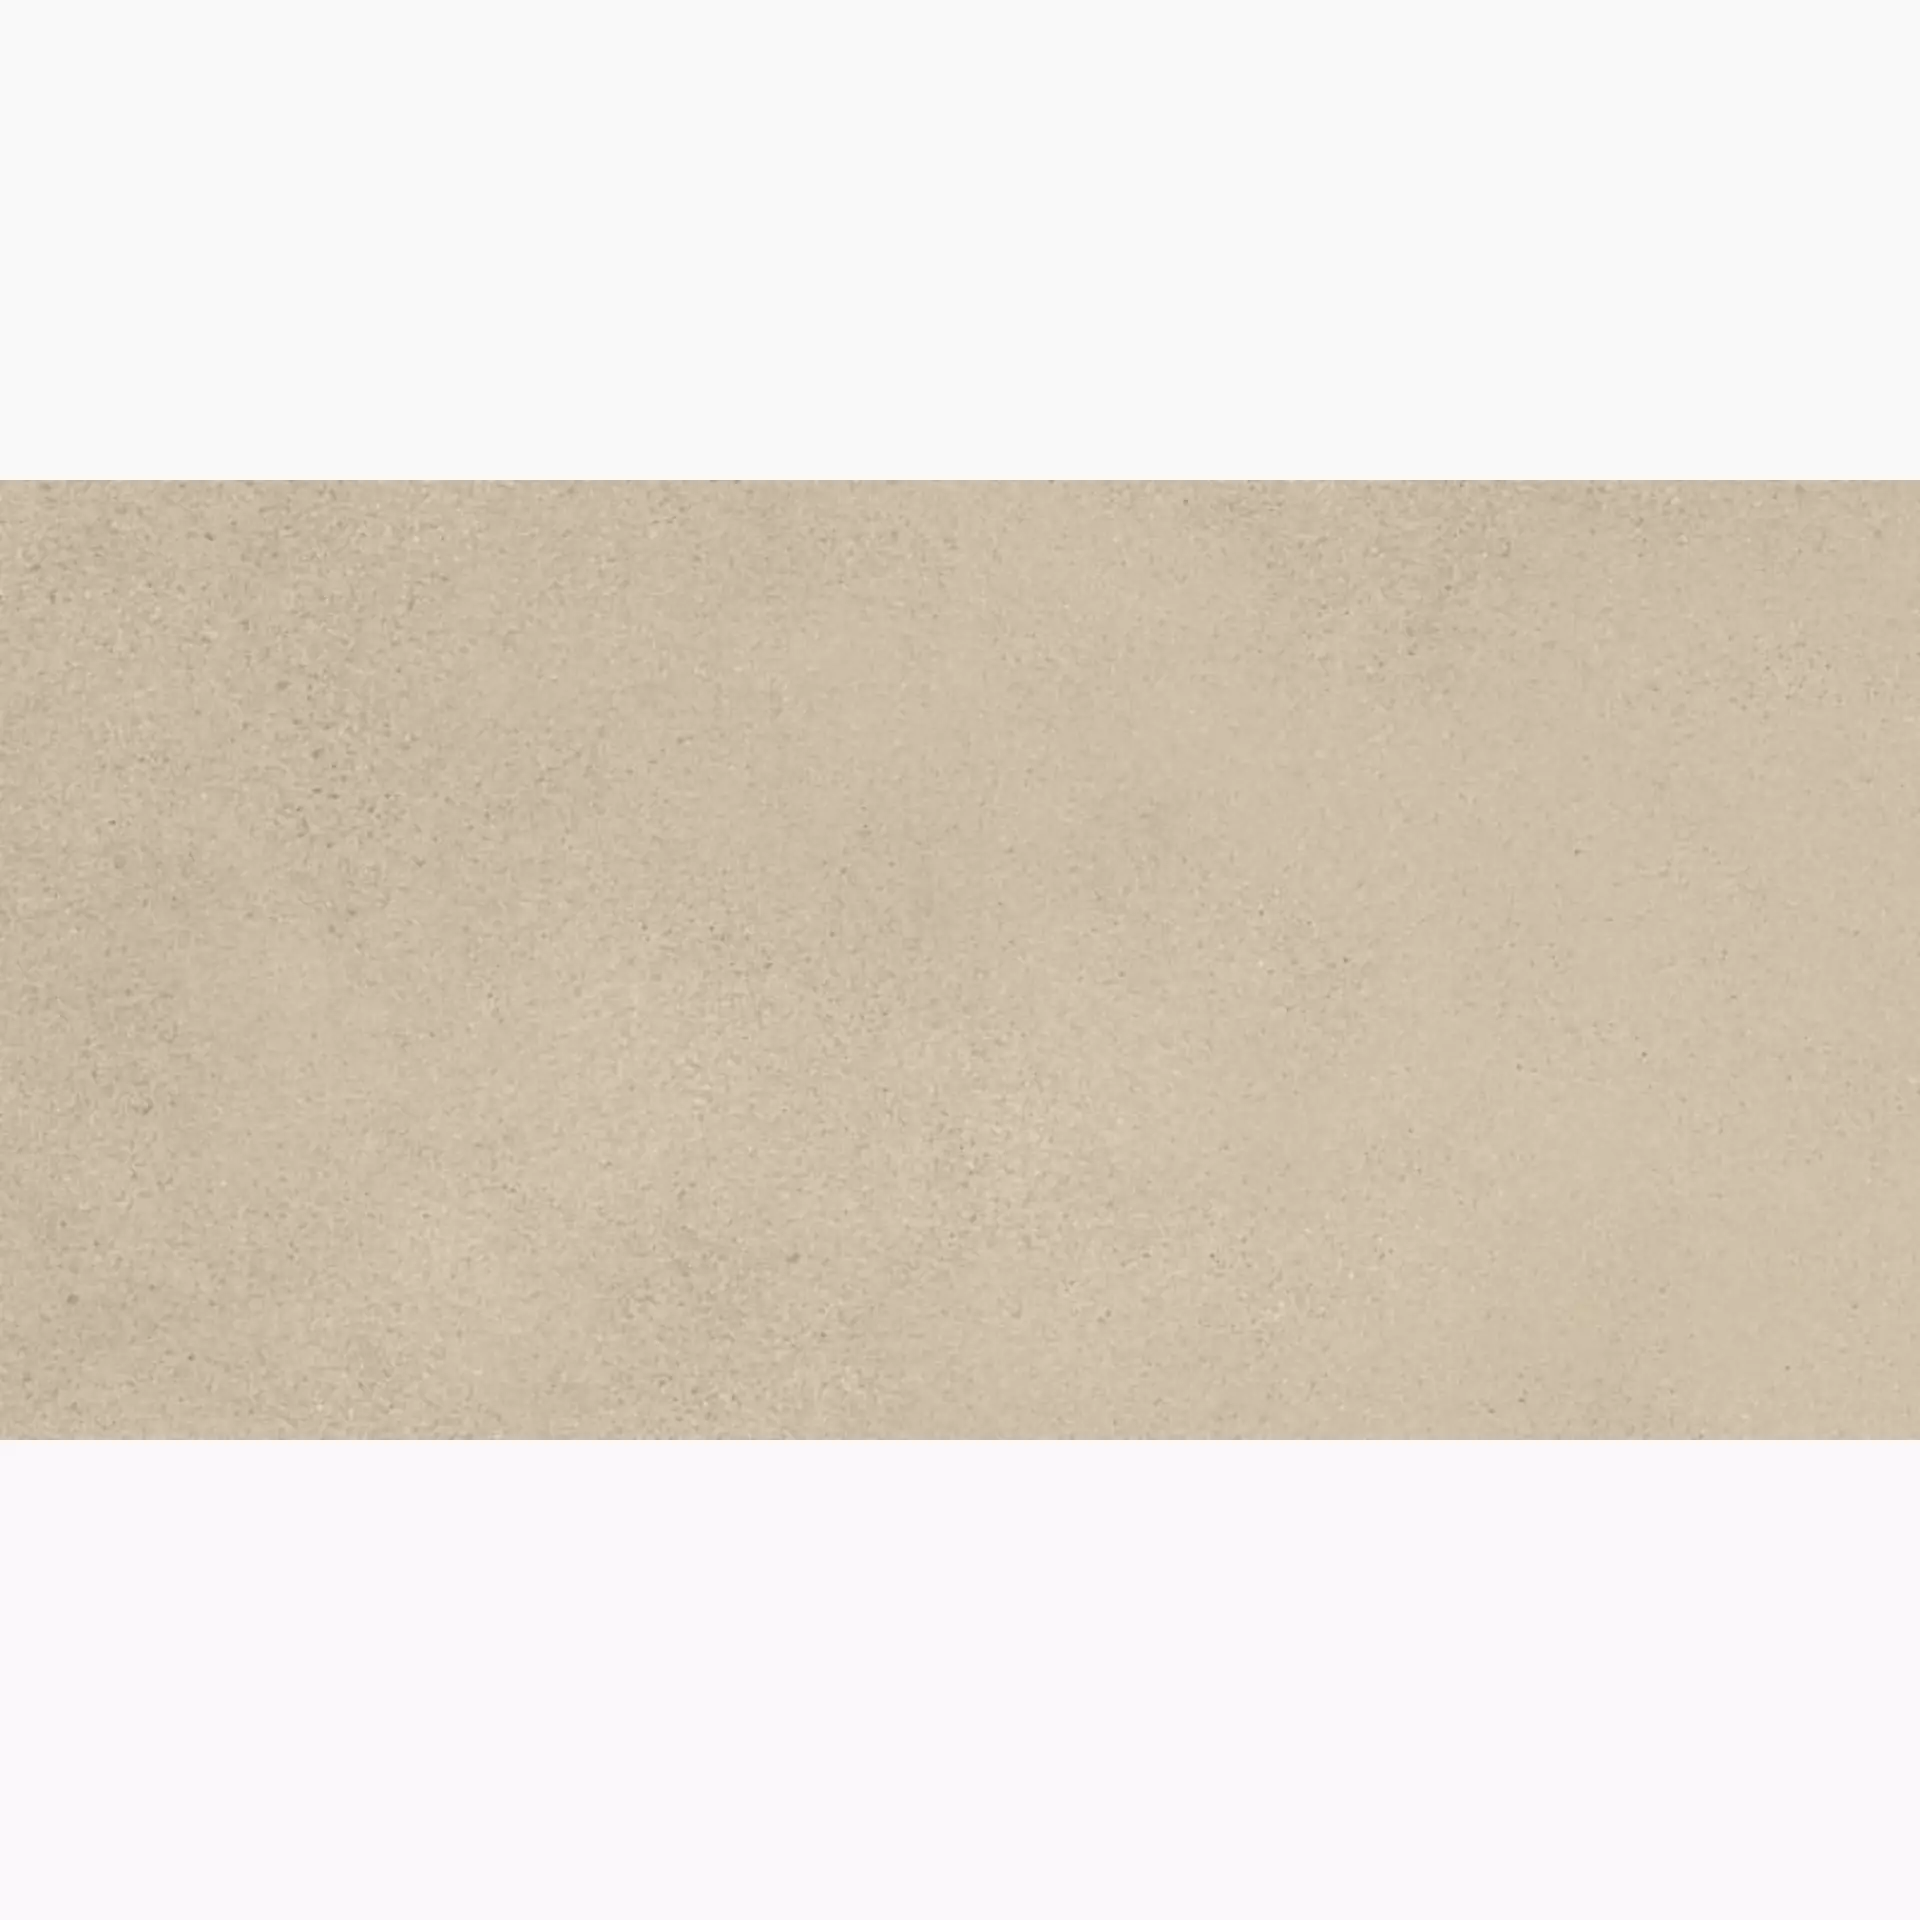 Sant Agostino Sable Beige Natural CSASABBE30 30x60cm rectified 10mm